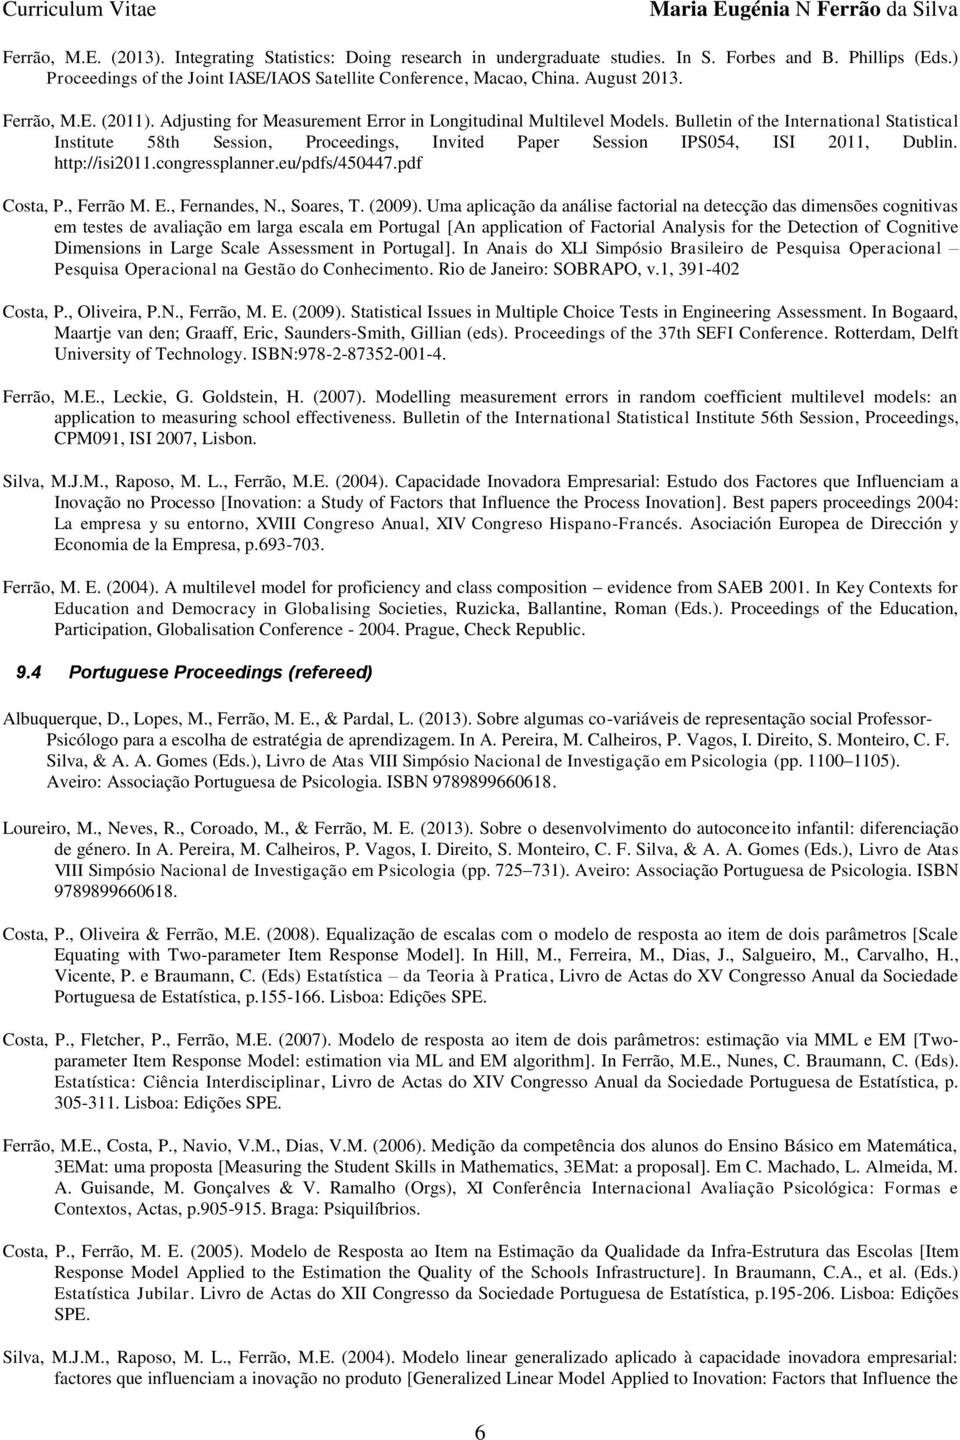 Bulletin of the International Statistical Institute 58th Session, Proceedings, Invited Paper Session IPS054, ISI 2011, Dublin. http://isi2011.congressplanner.eu/pdfs/450447.pdf Costa, P., Ferrão M. E.